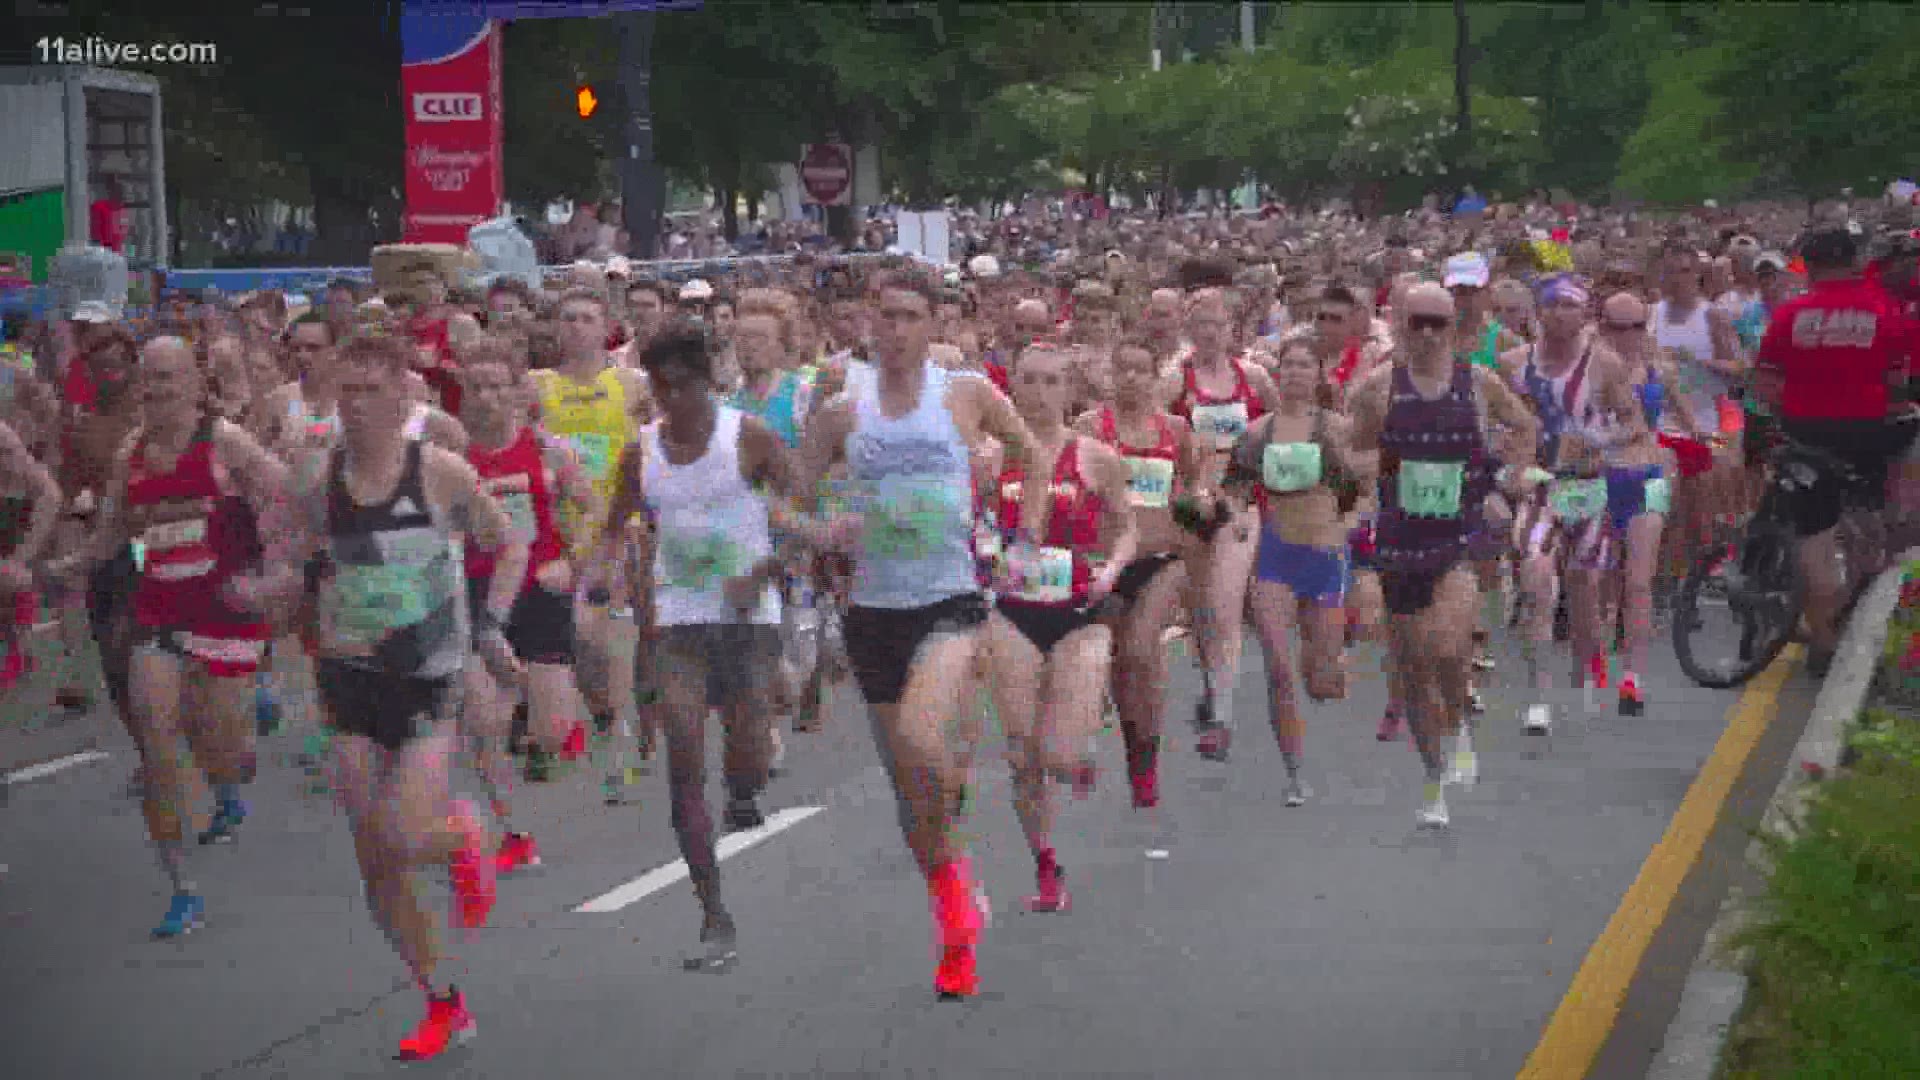 Atlanta Track Club Director Rich Kenah discusses the logistics and reasoning behind moving the date for this year's AJC Peachtree Road Race in the COVID-19 world.